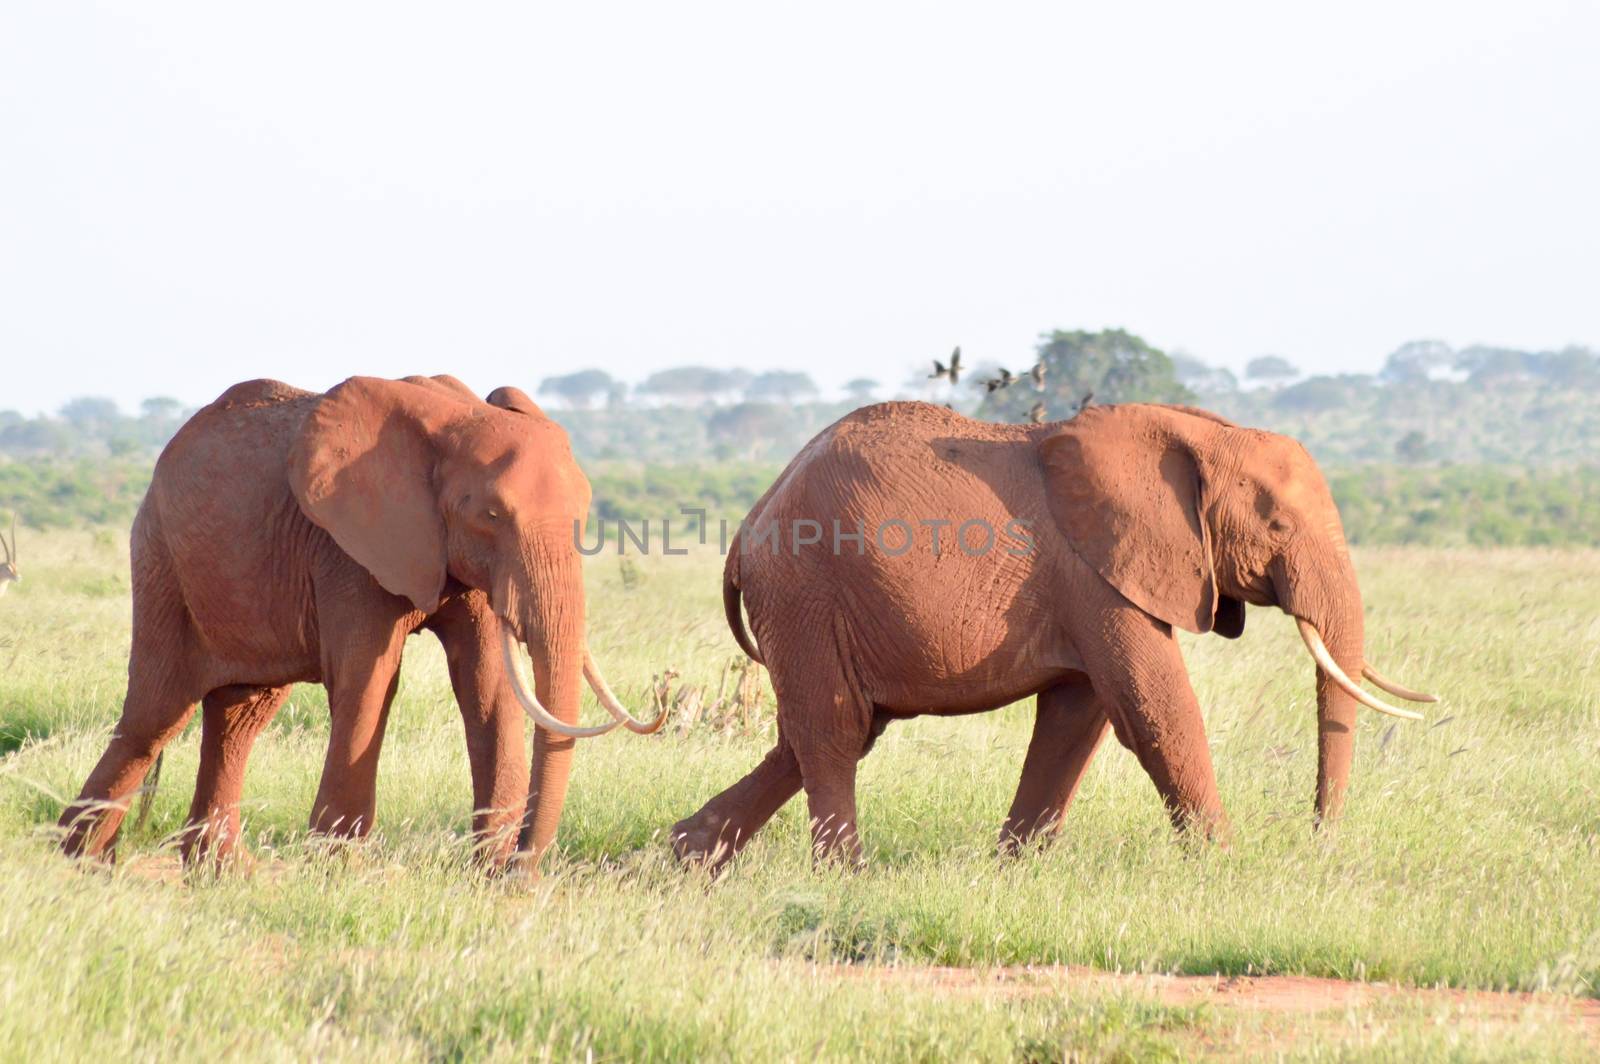 Two elephants walking one behind the other in the savanna of East Tsavo Park in Kenya